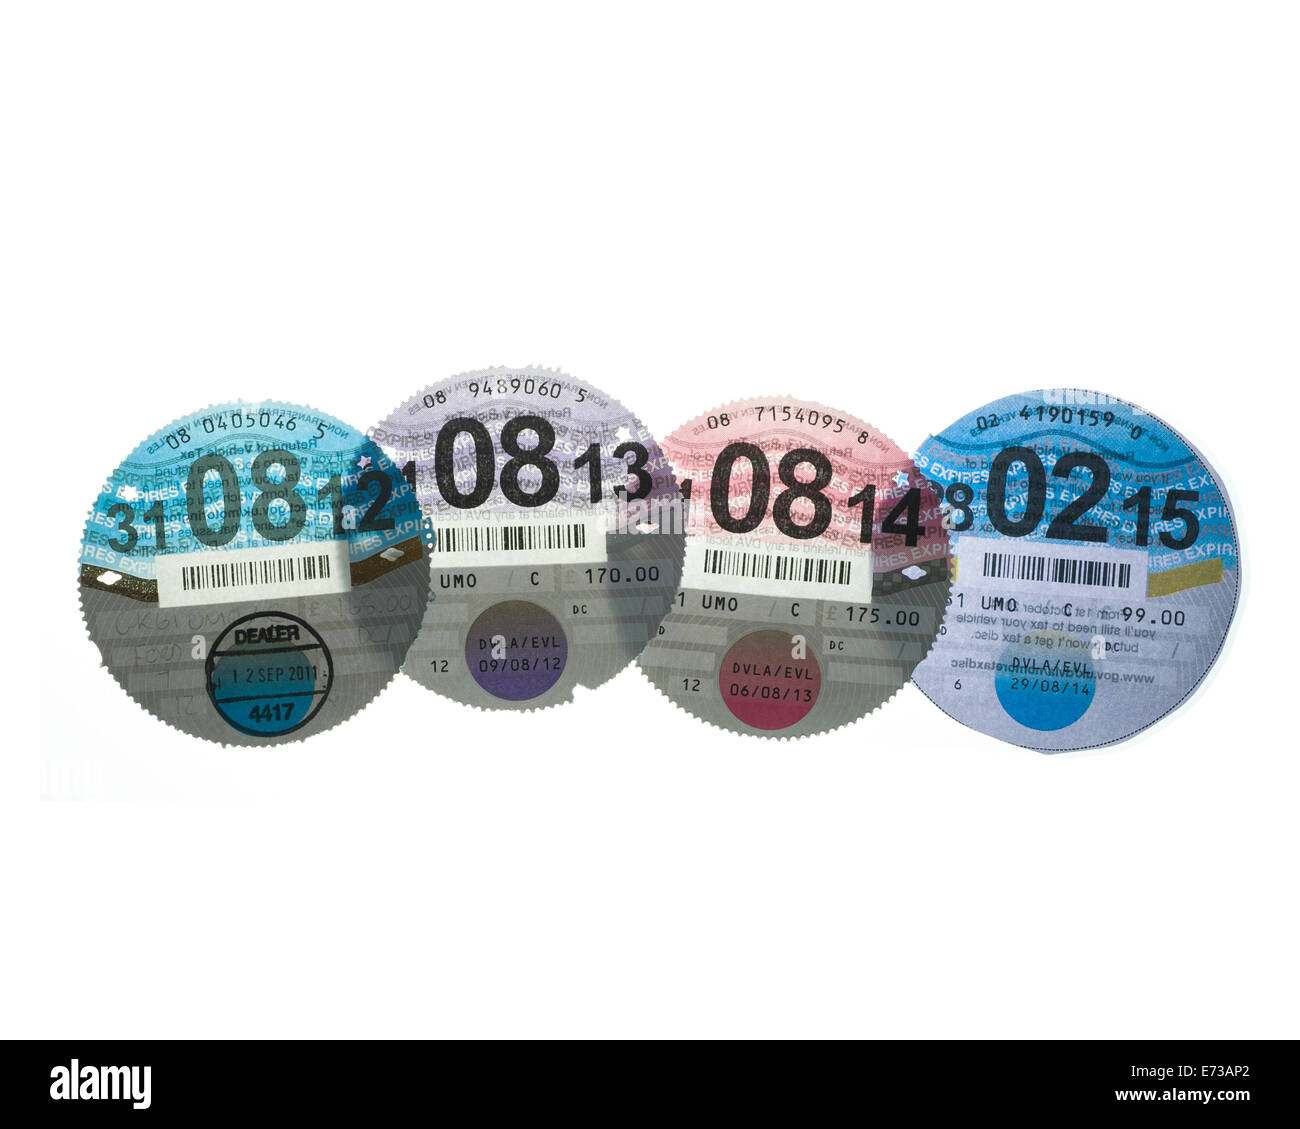 Four UK HMRC DVLC Car Tax discs backlit on a pure white background to show watermarks. Stock Photo